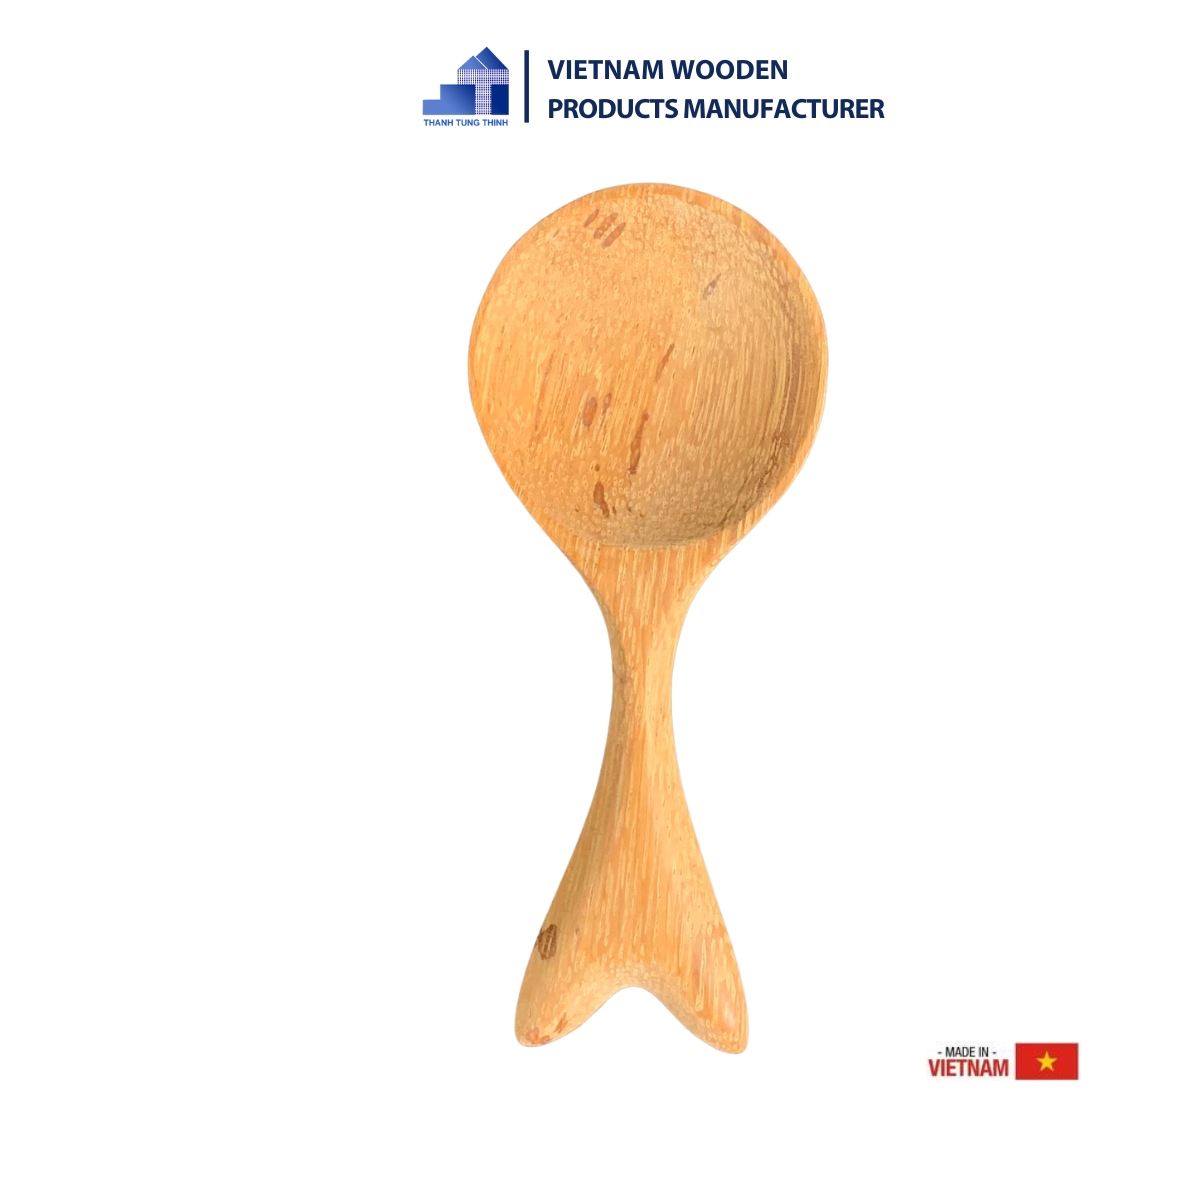 The mini dolphin-shaped wooden spoon is made from premium quality wood